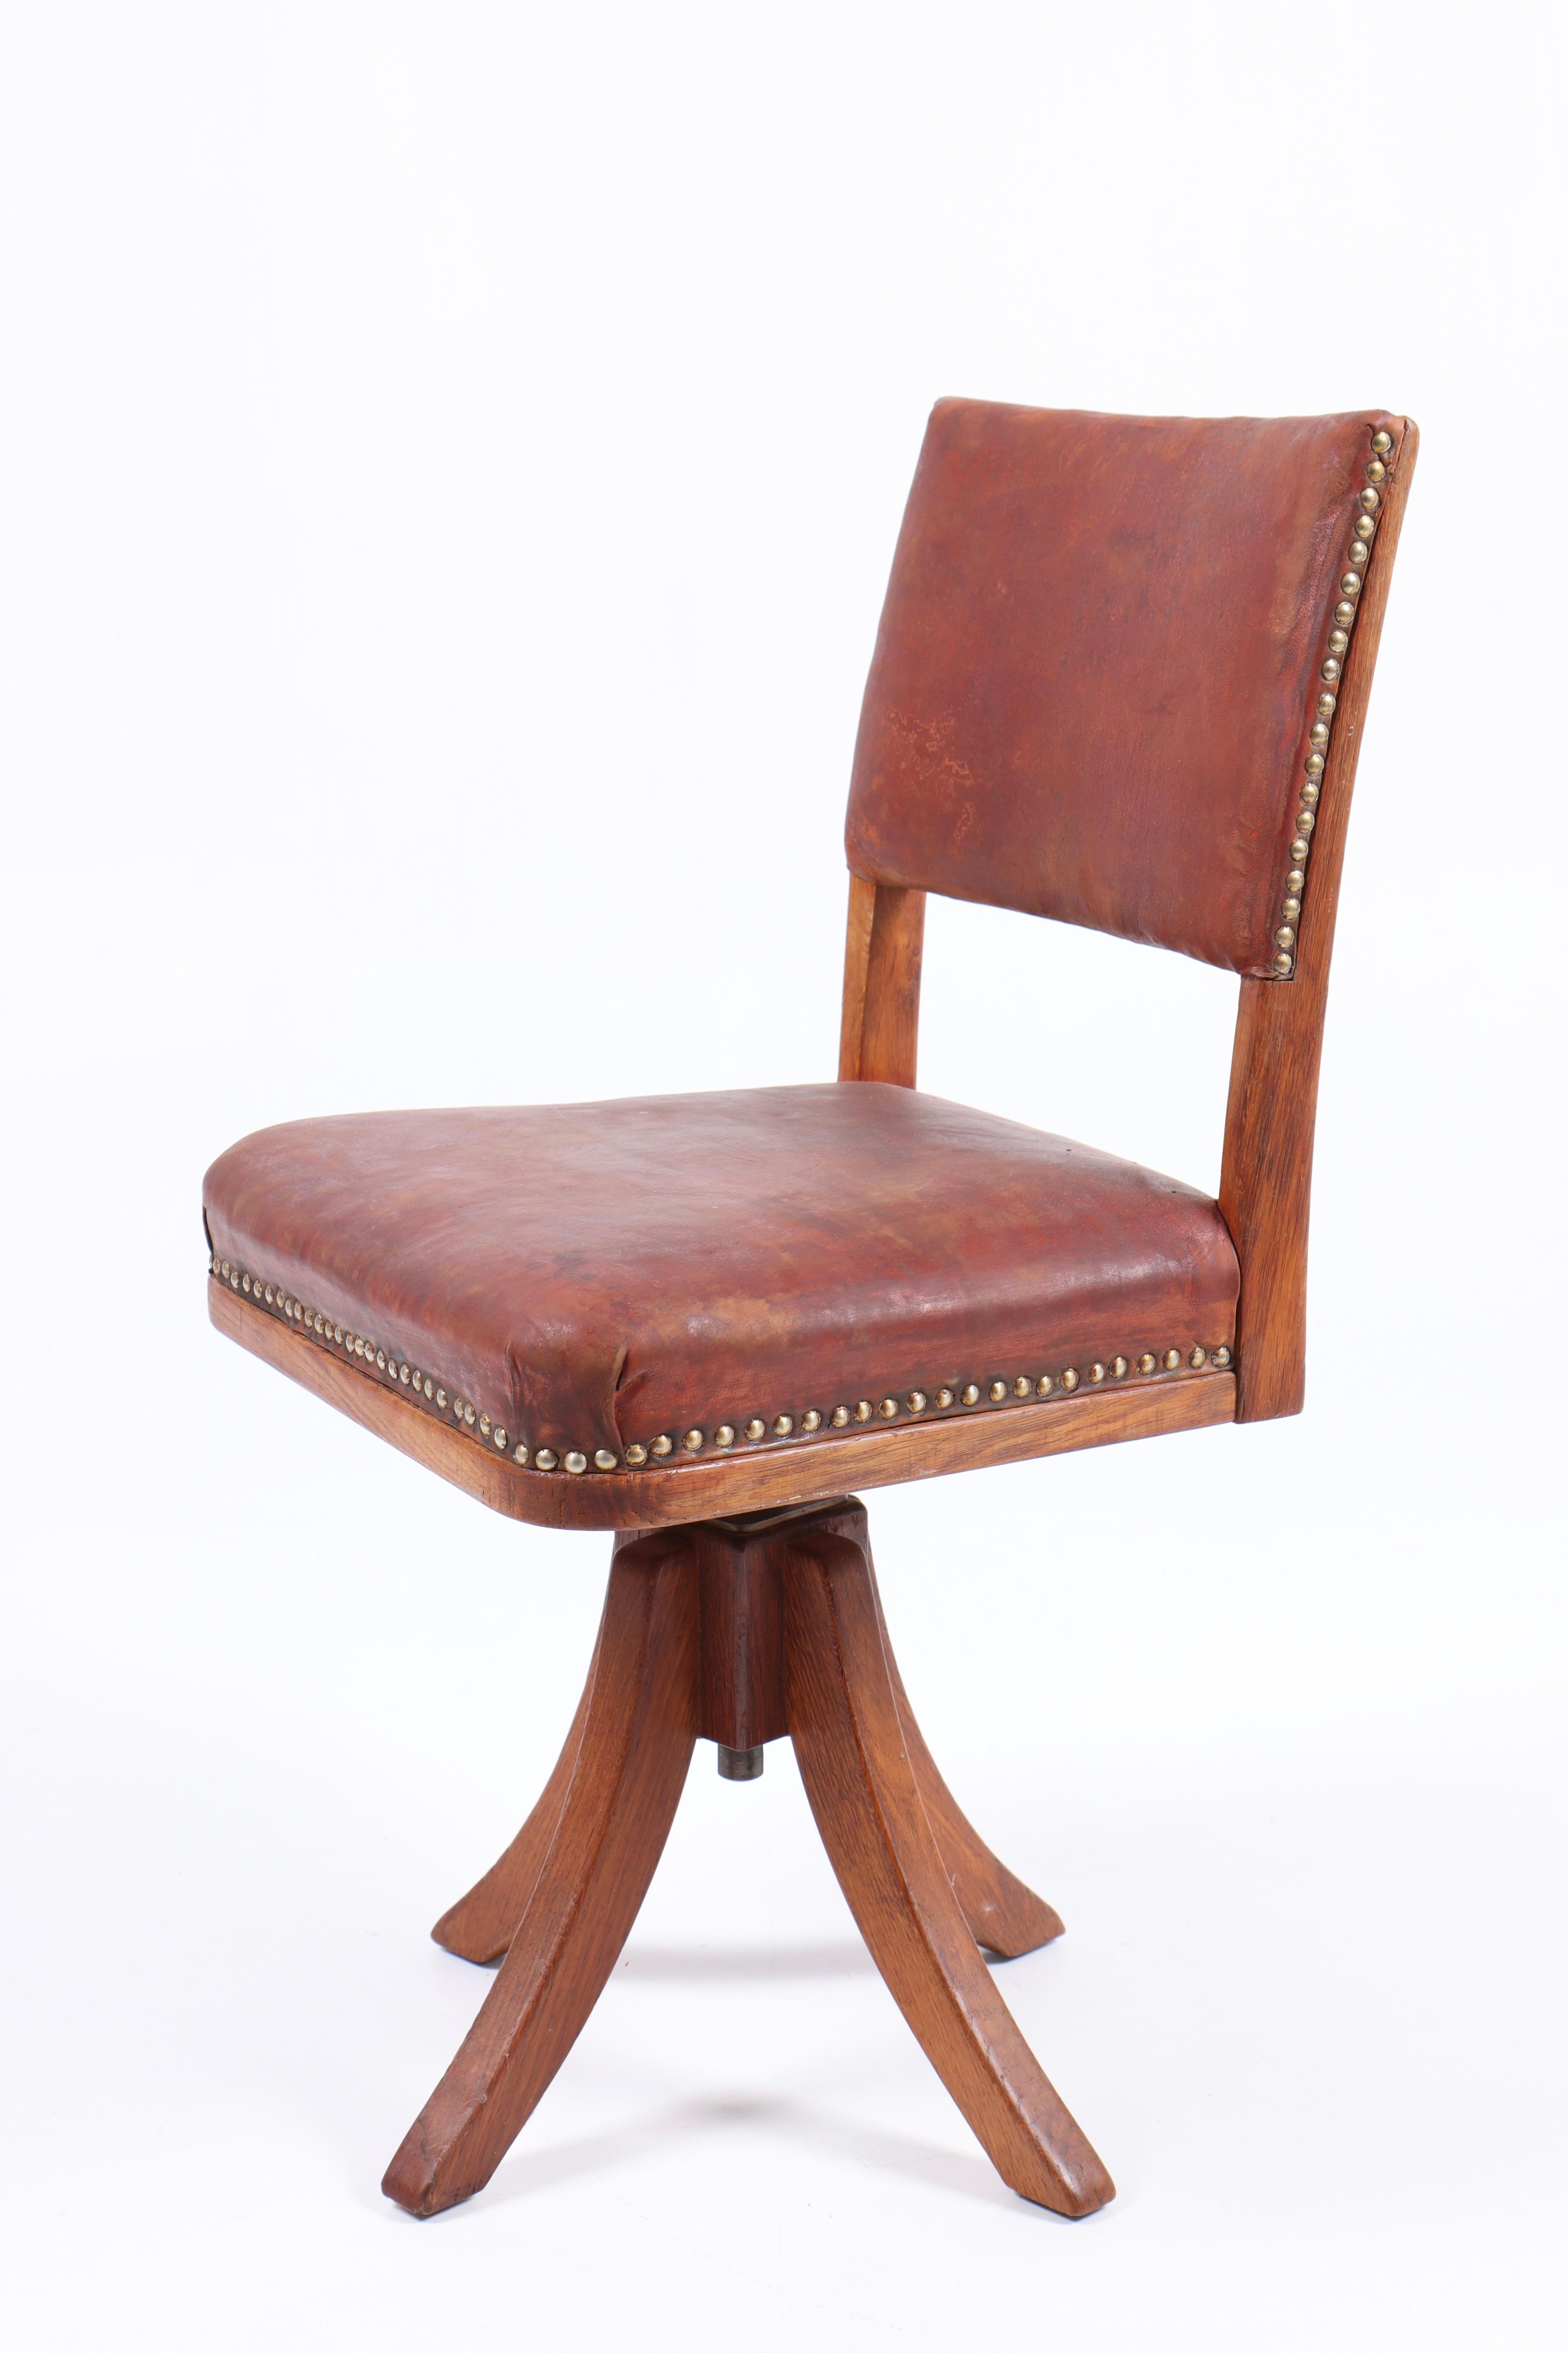 Scandinavian Desk Chair in Patinated Leather and Oak by Danish Cabinetmaker Frits Henningsen For Sale